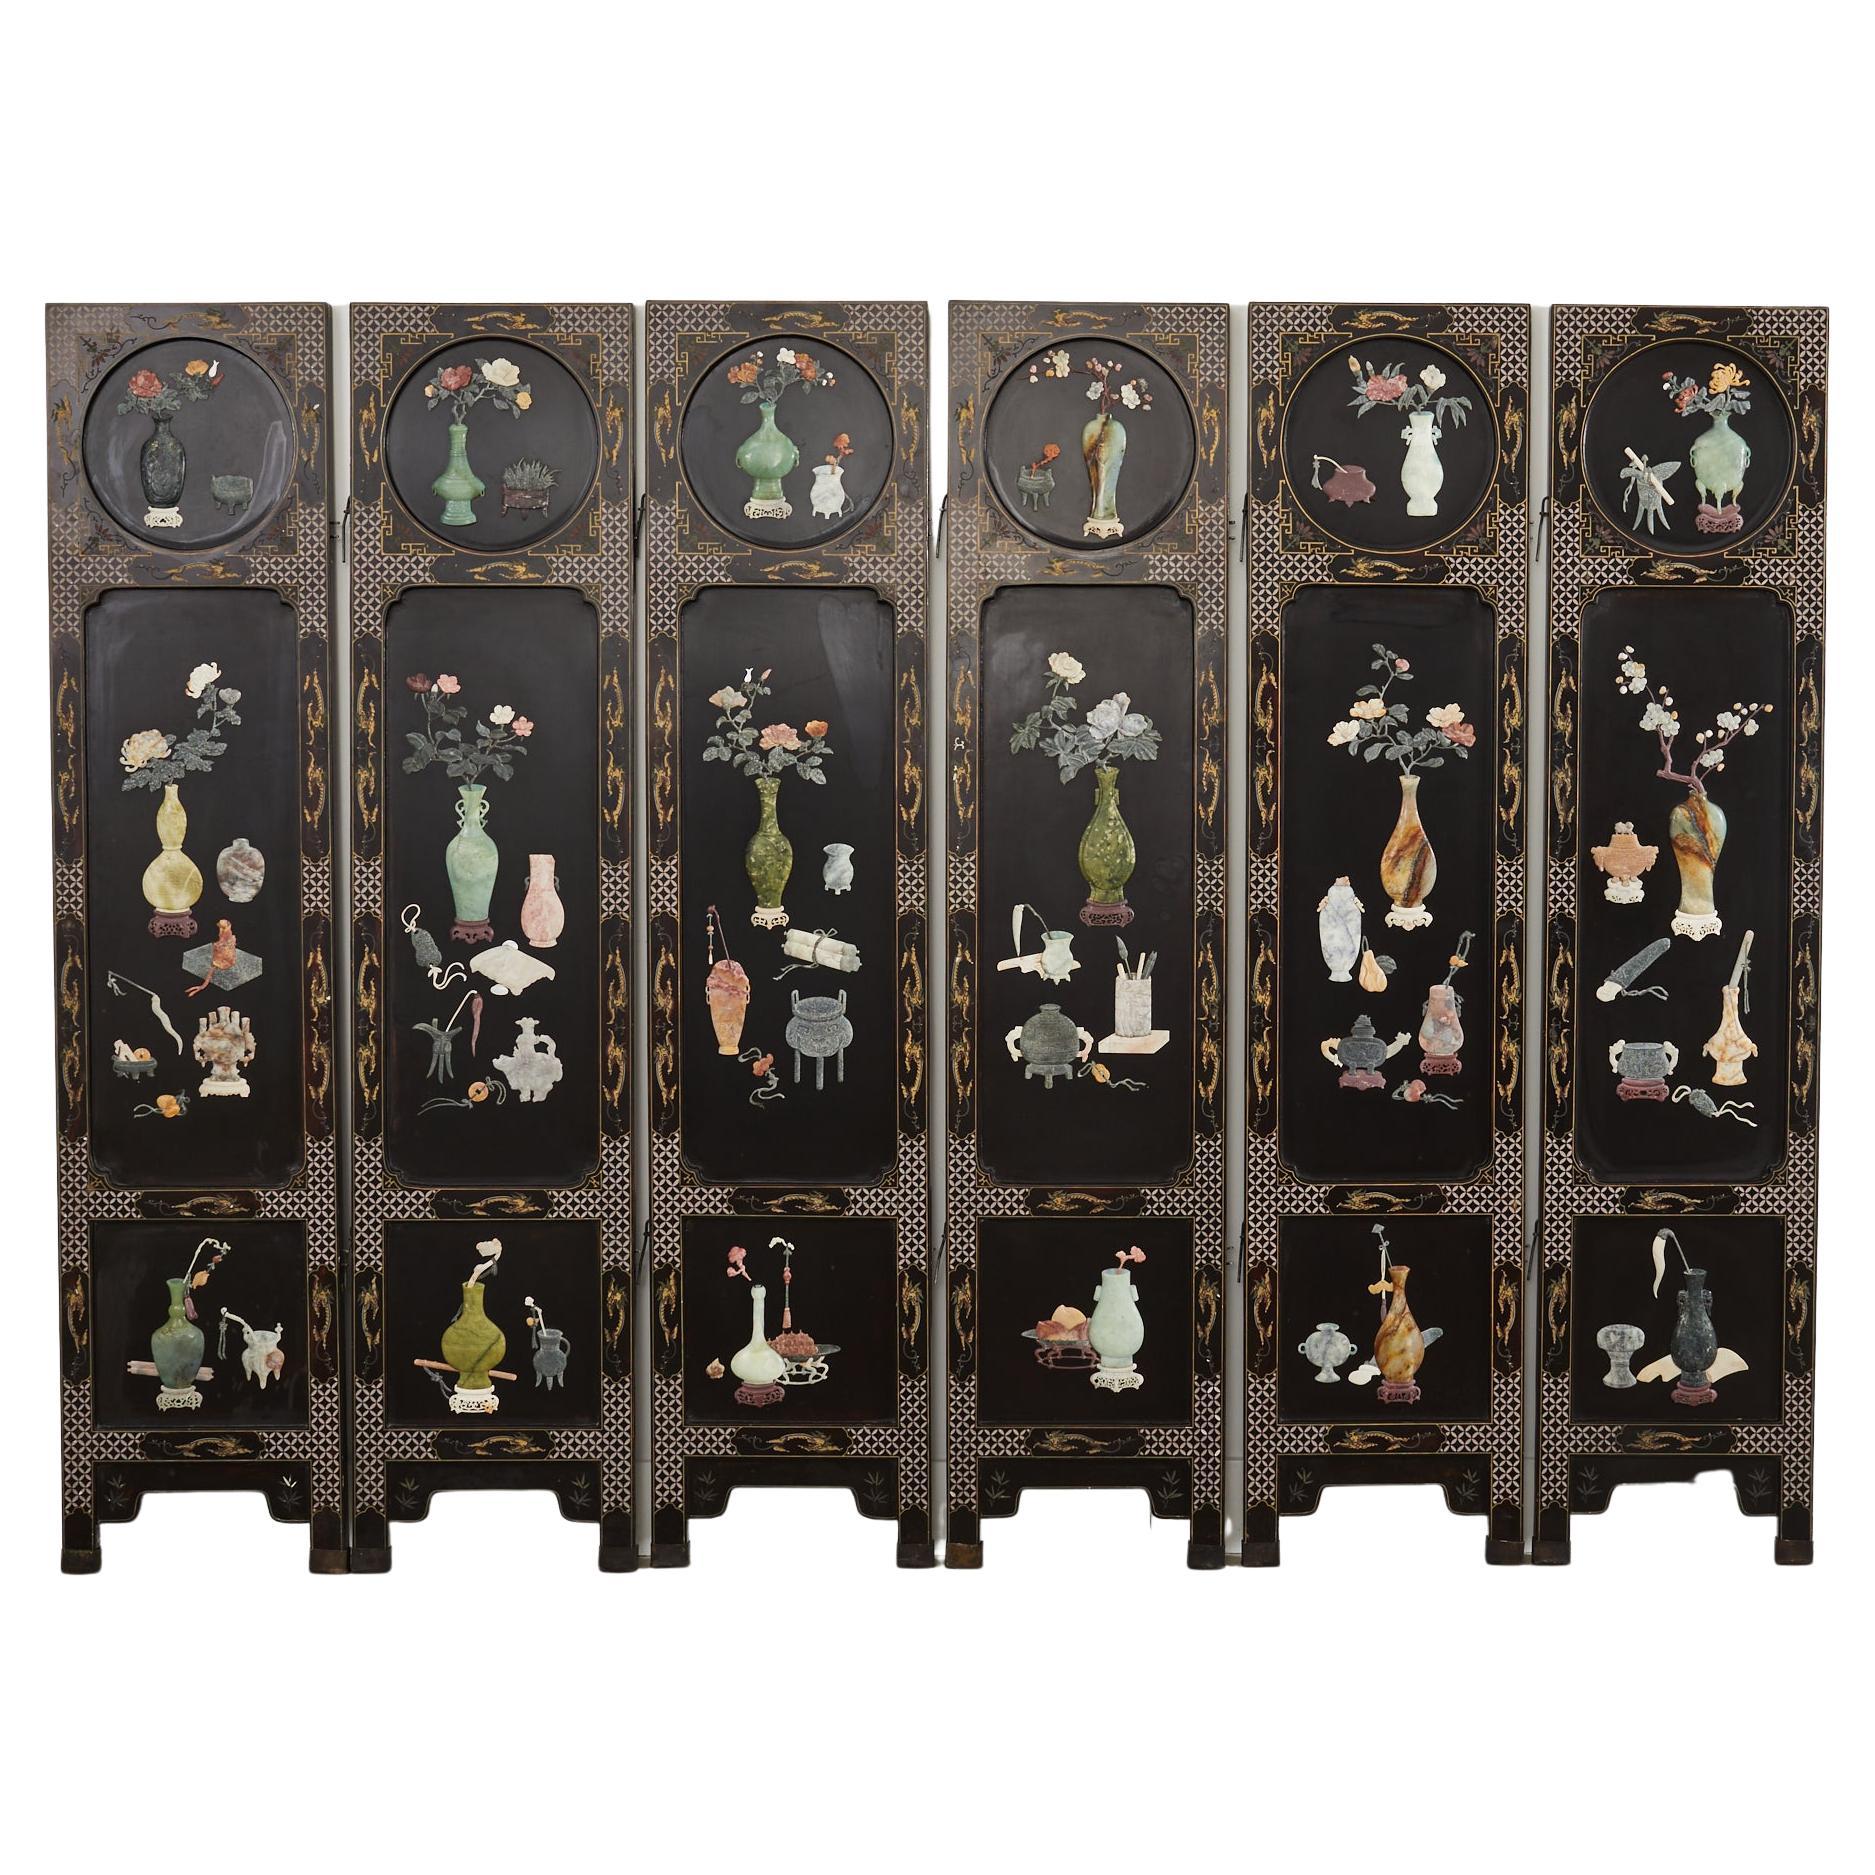 Chinese Export Six Panel Hardstone Lacquer Screen  For Sale